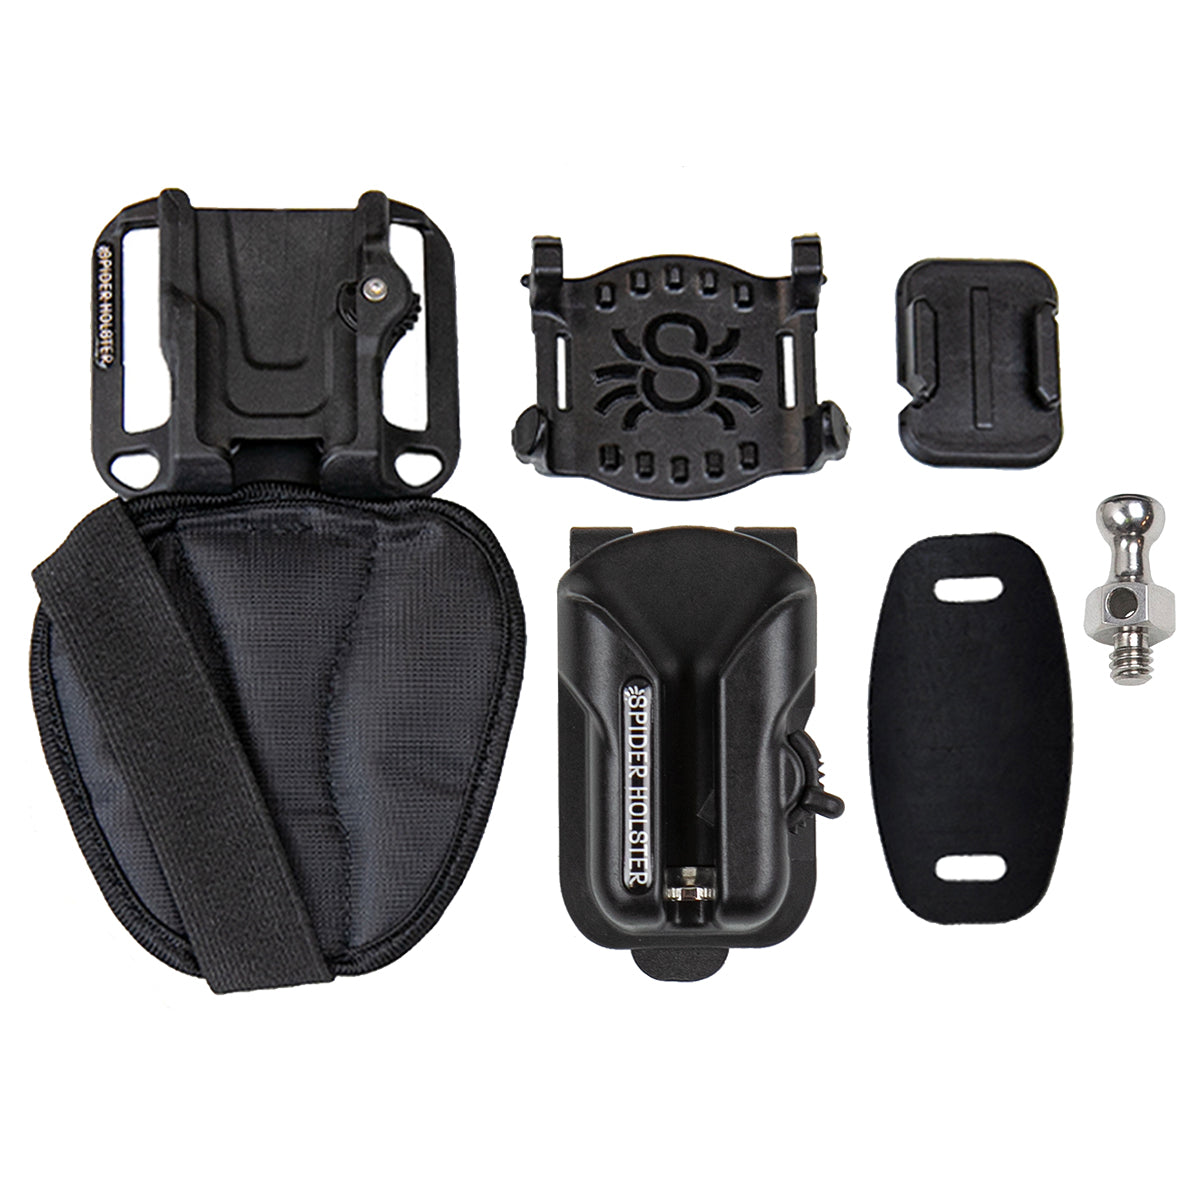 195LM: Spider-X Backpack Holster + Accessory Pin Kit